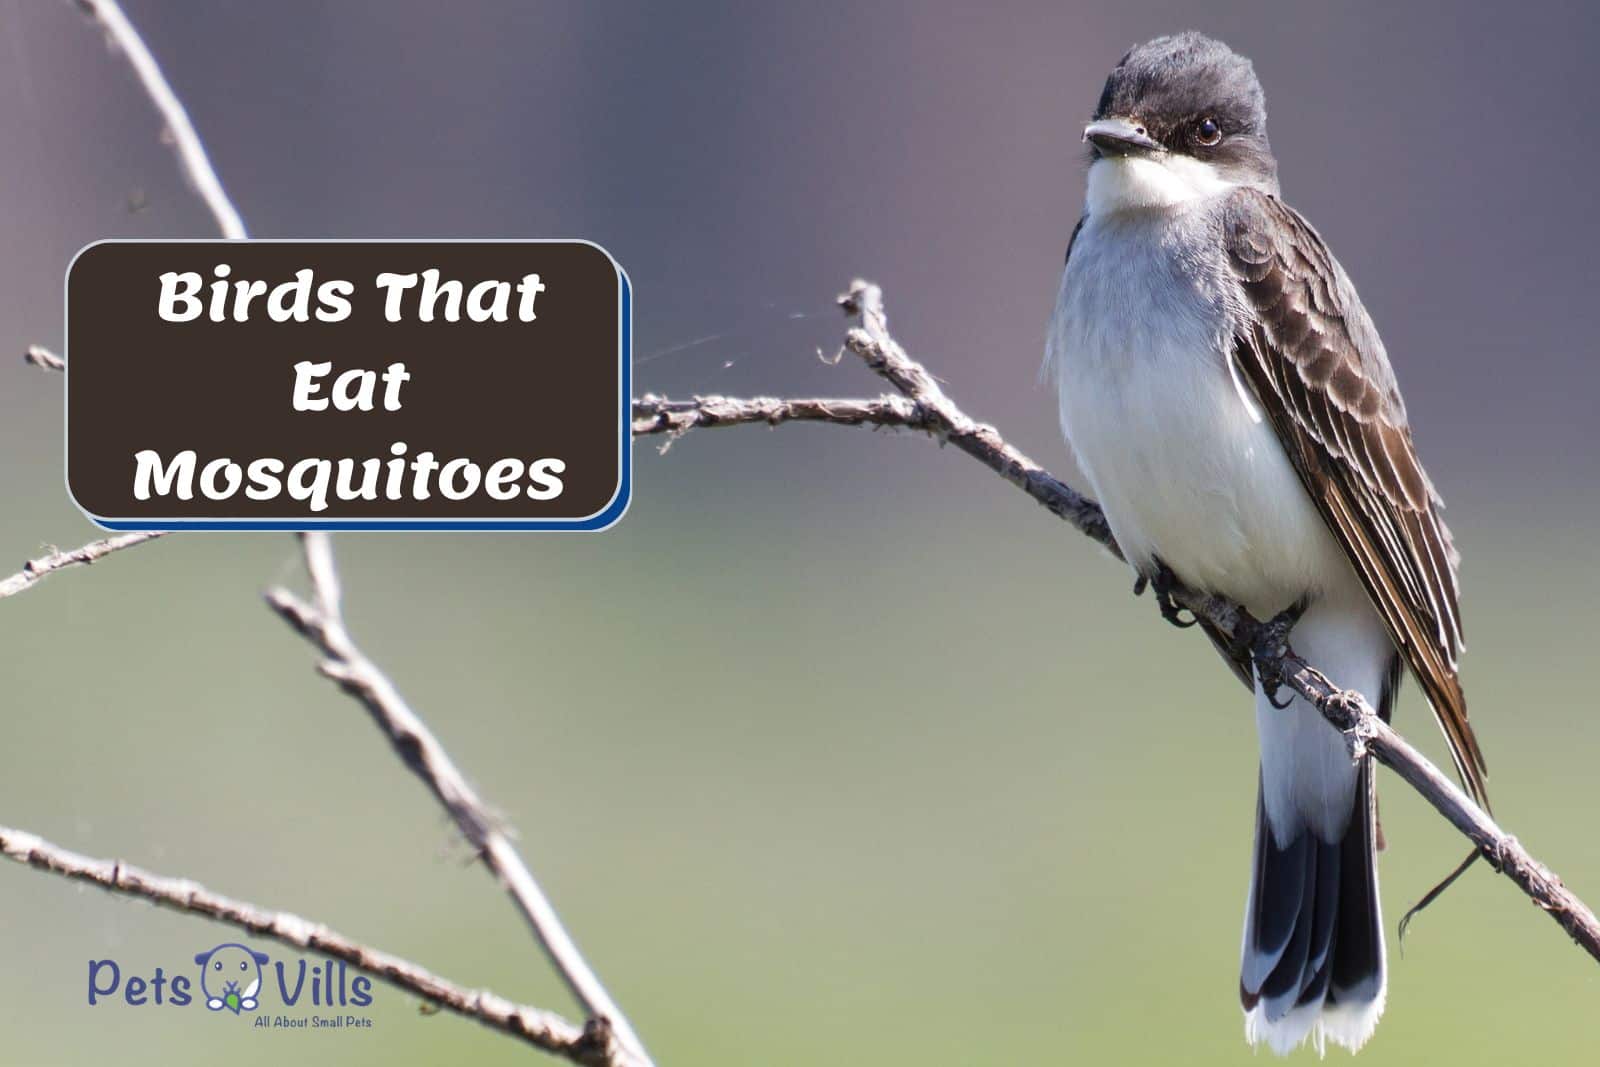 Eastern Kingbird, ONE OF THE Birds That Eat Mosquitoes